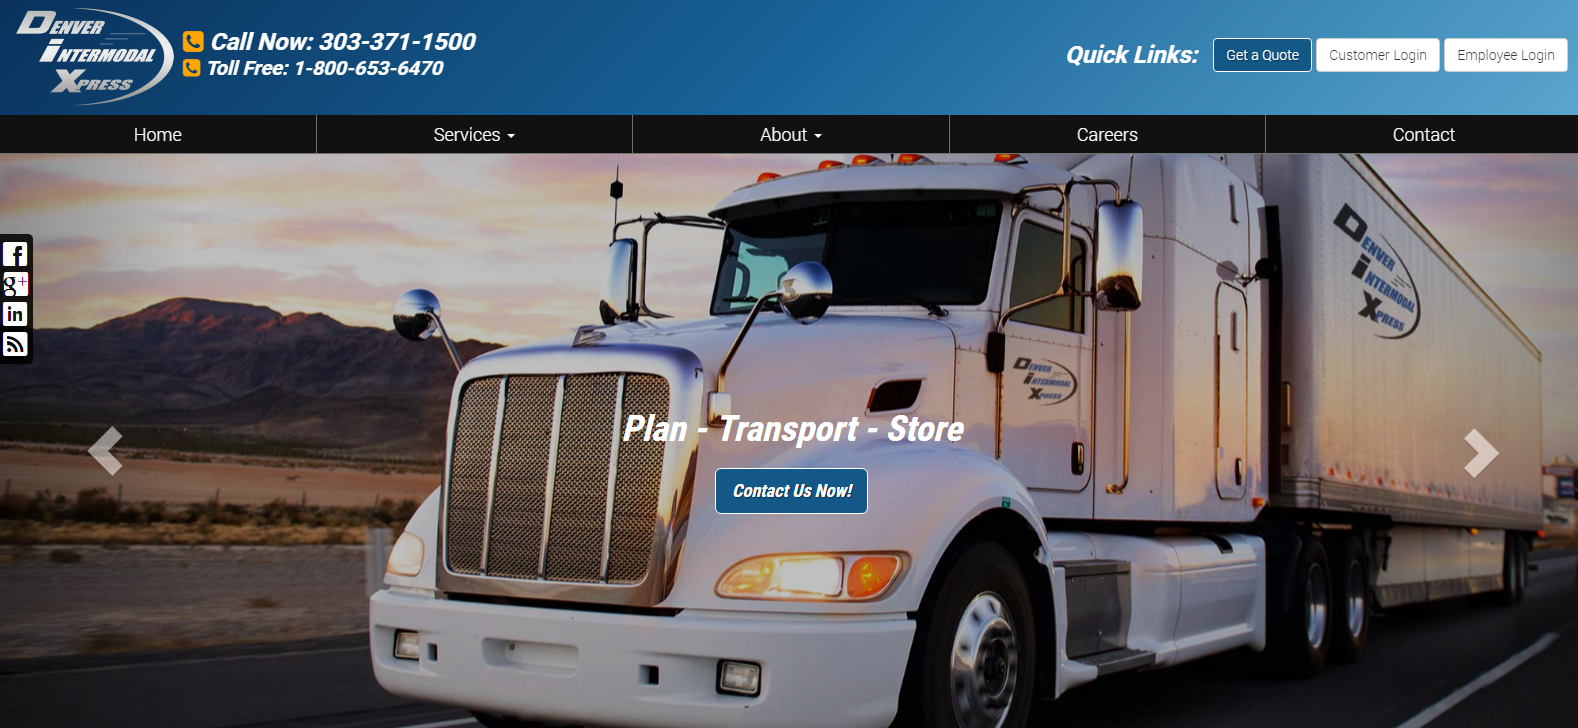 
New Website Launched: Denver Intermodal Xpress